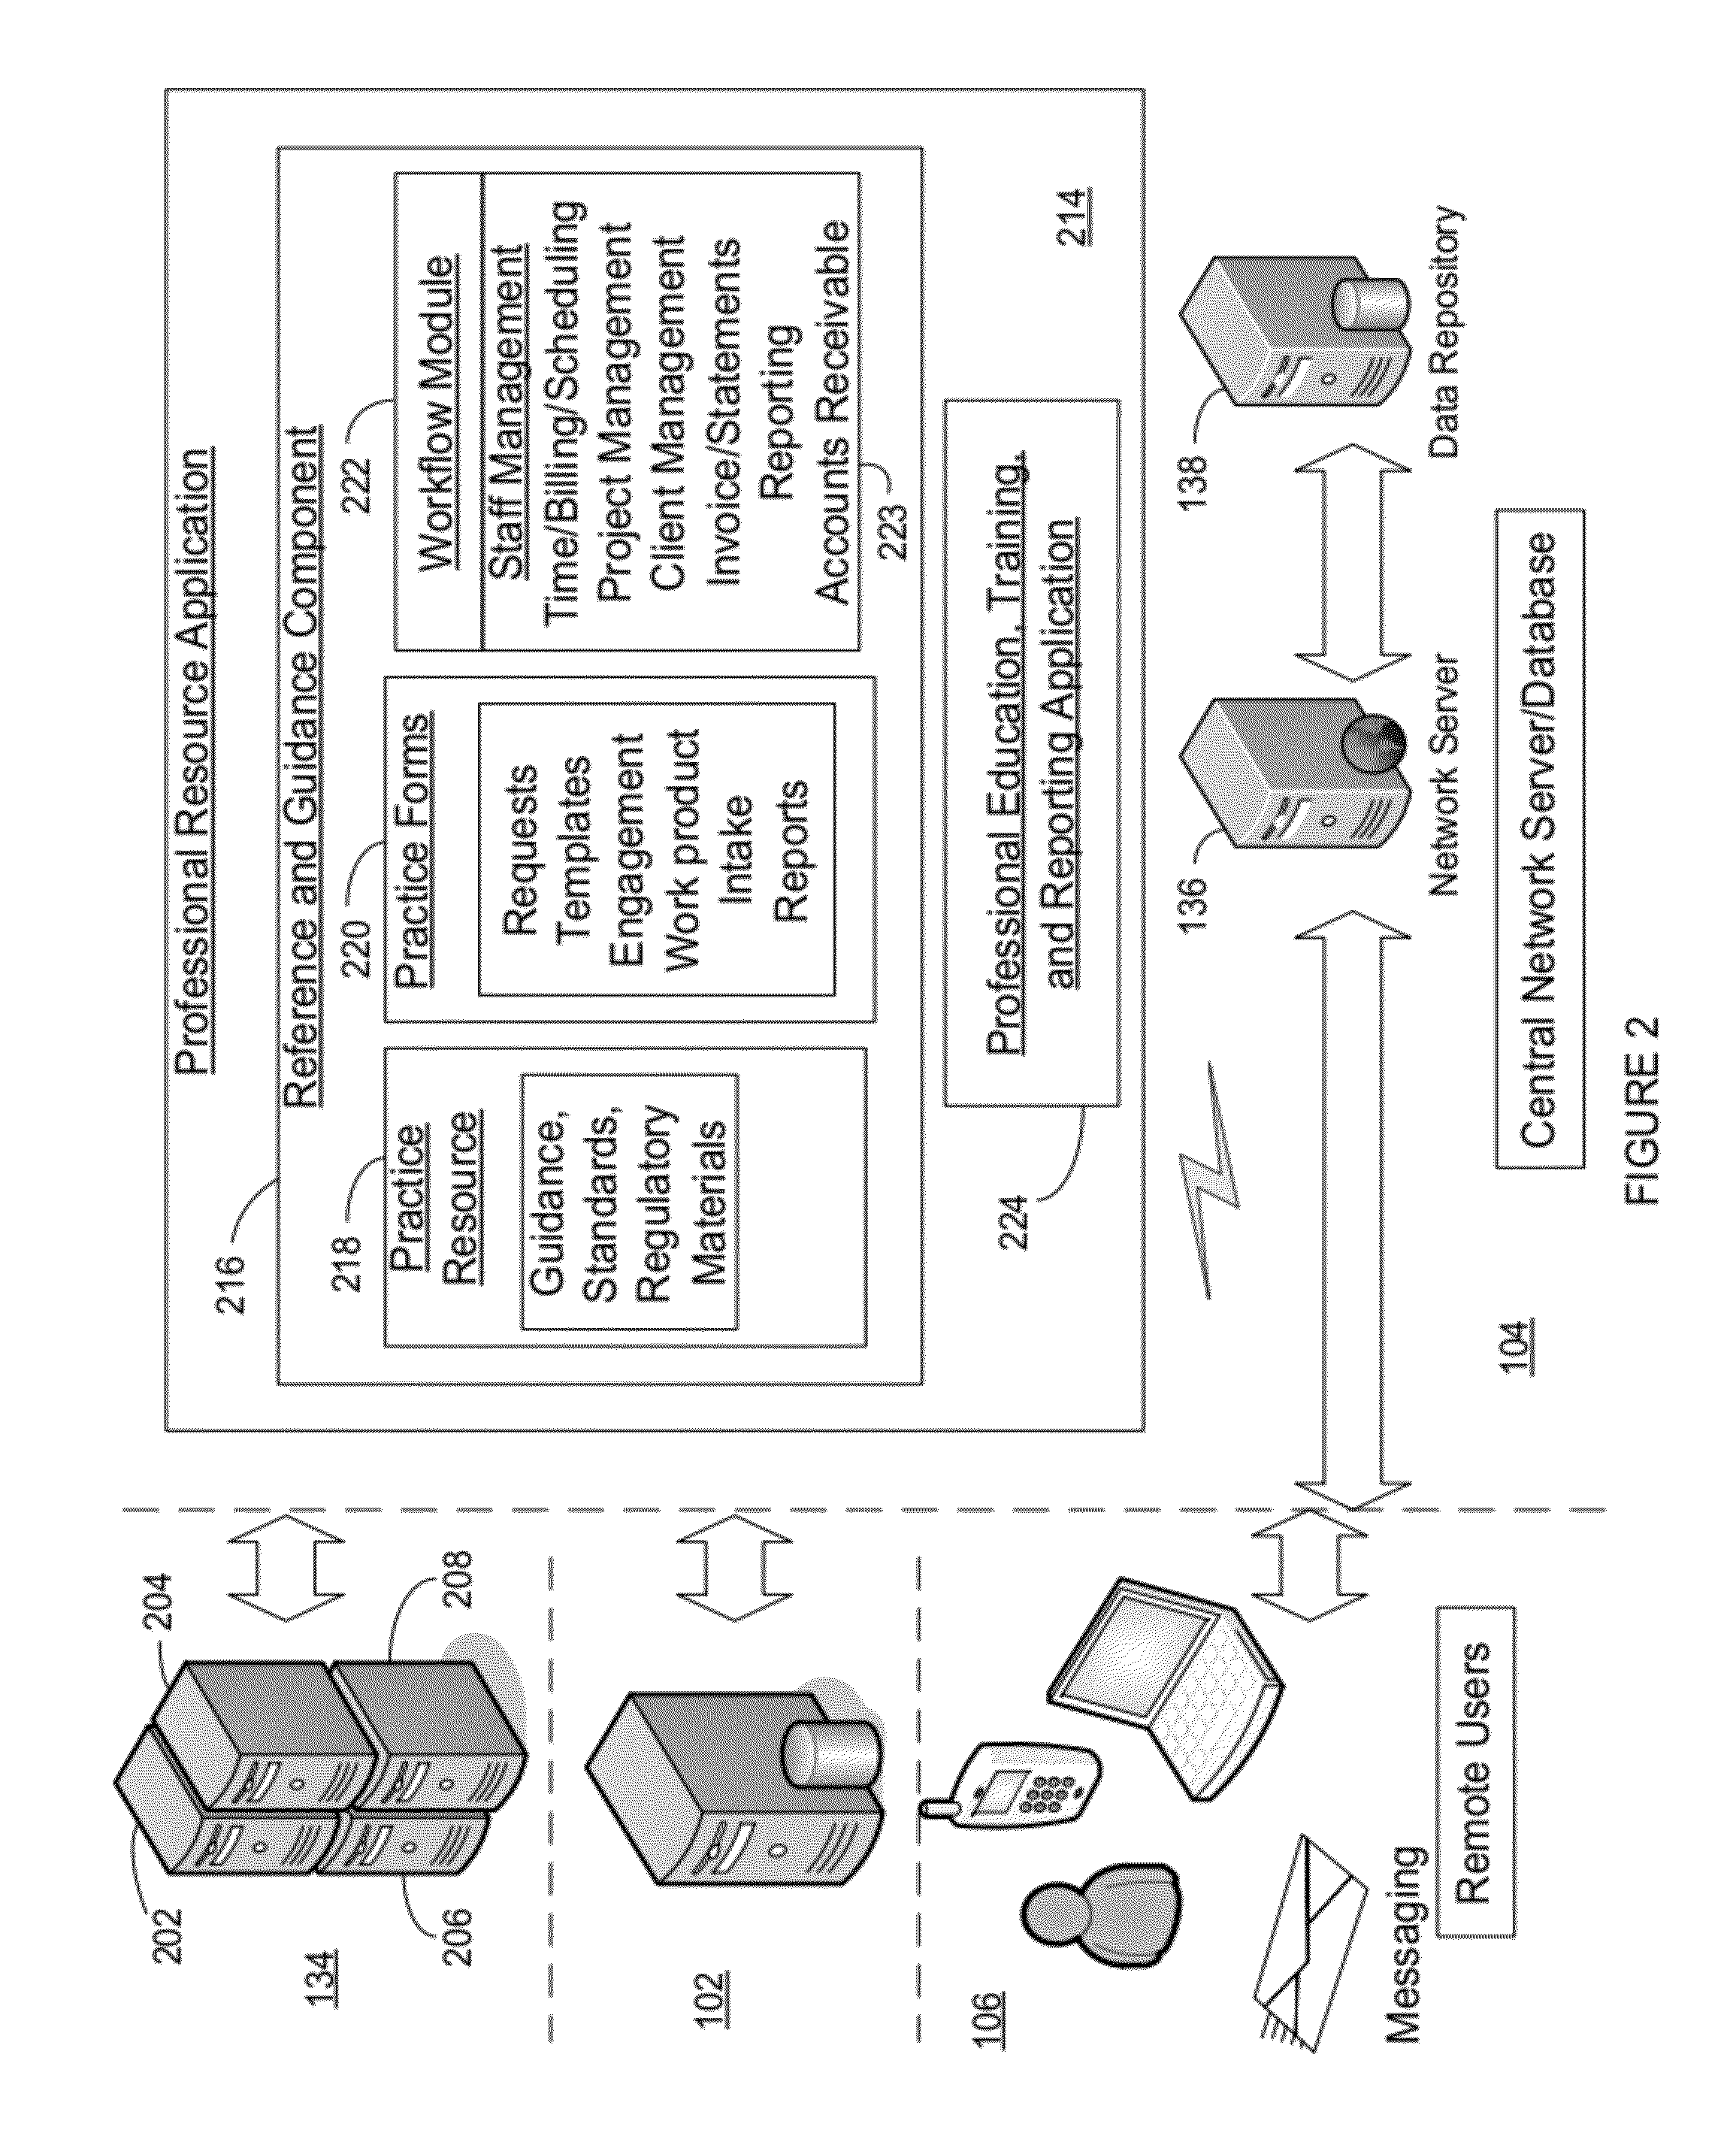 Method and system for implementing workflows and managng staff and engagements